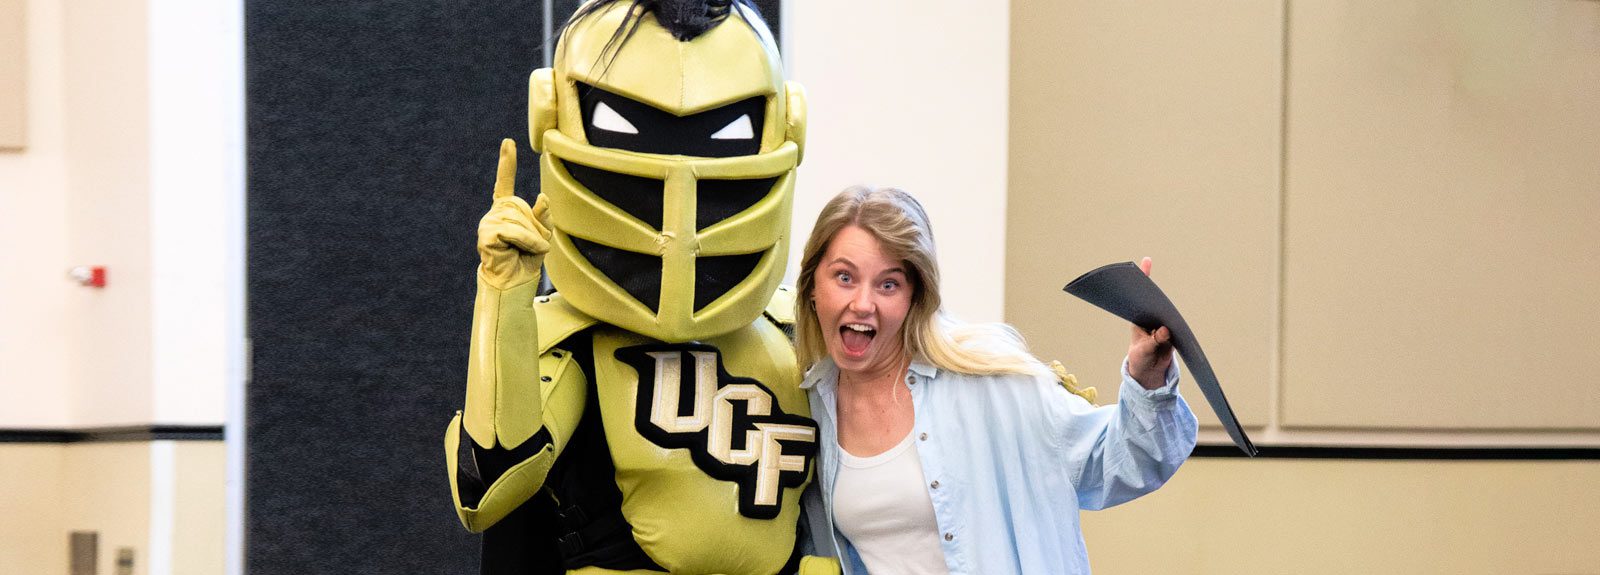 Student writer poses with Knightro mascot